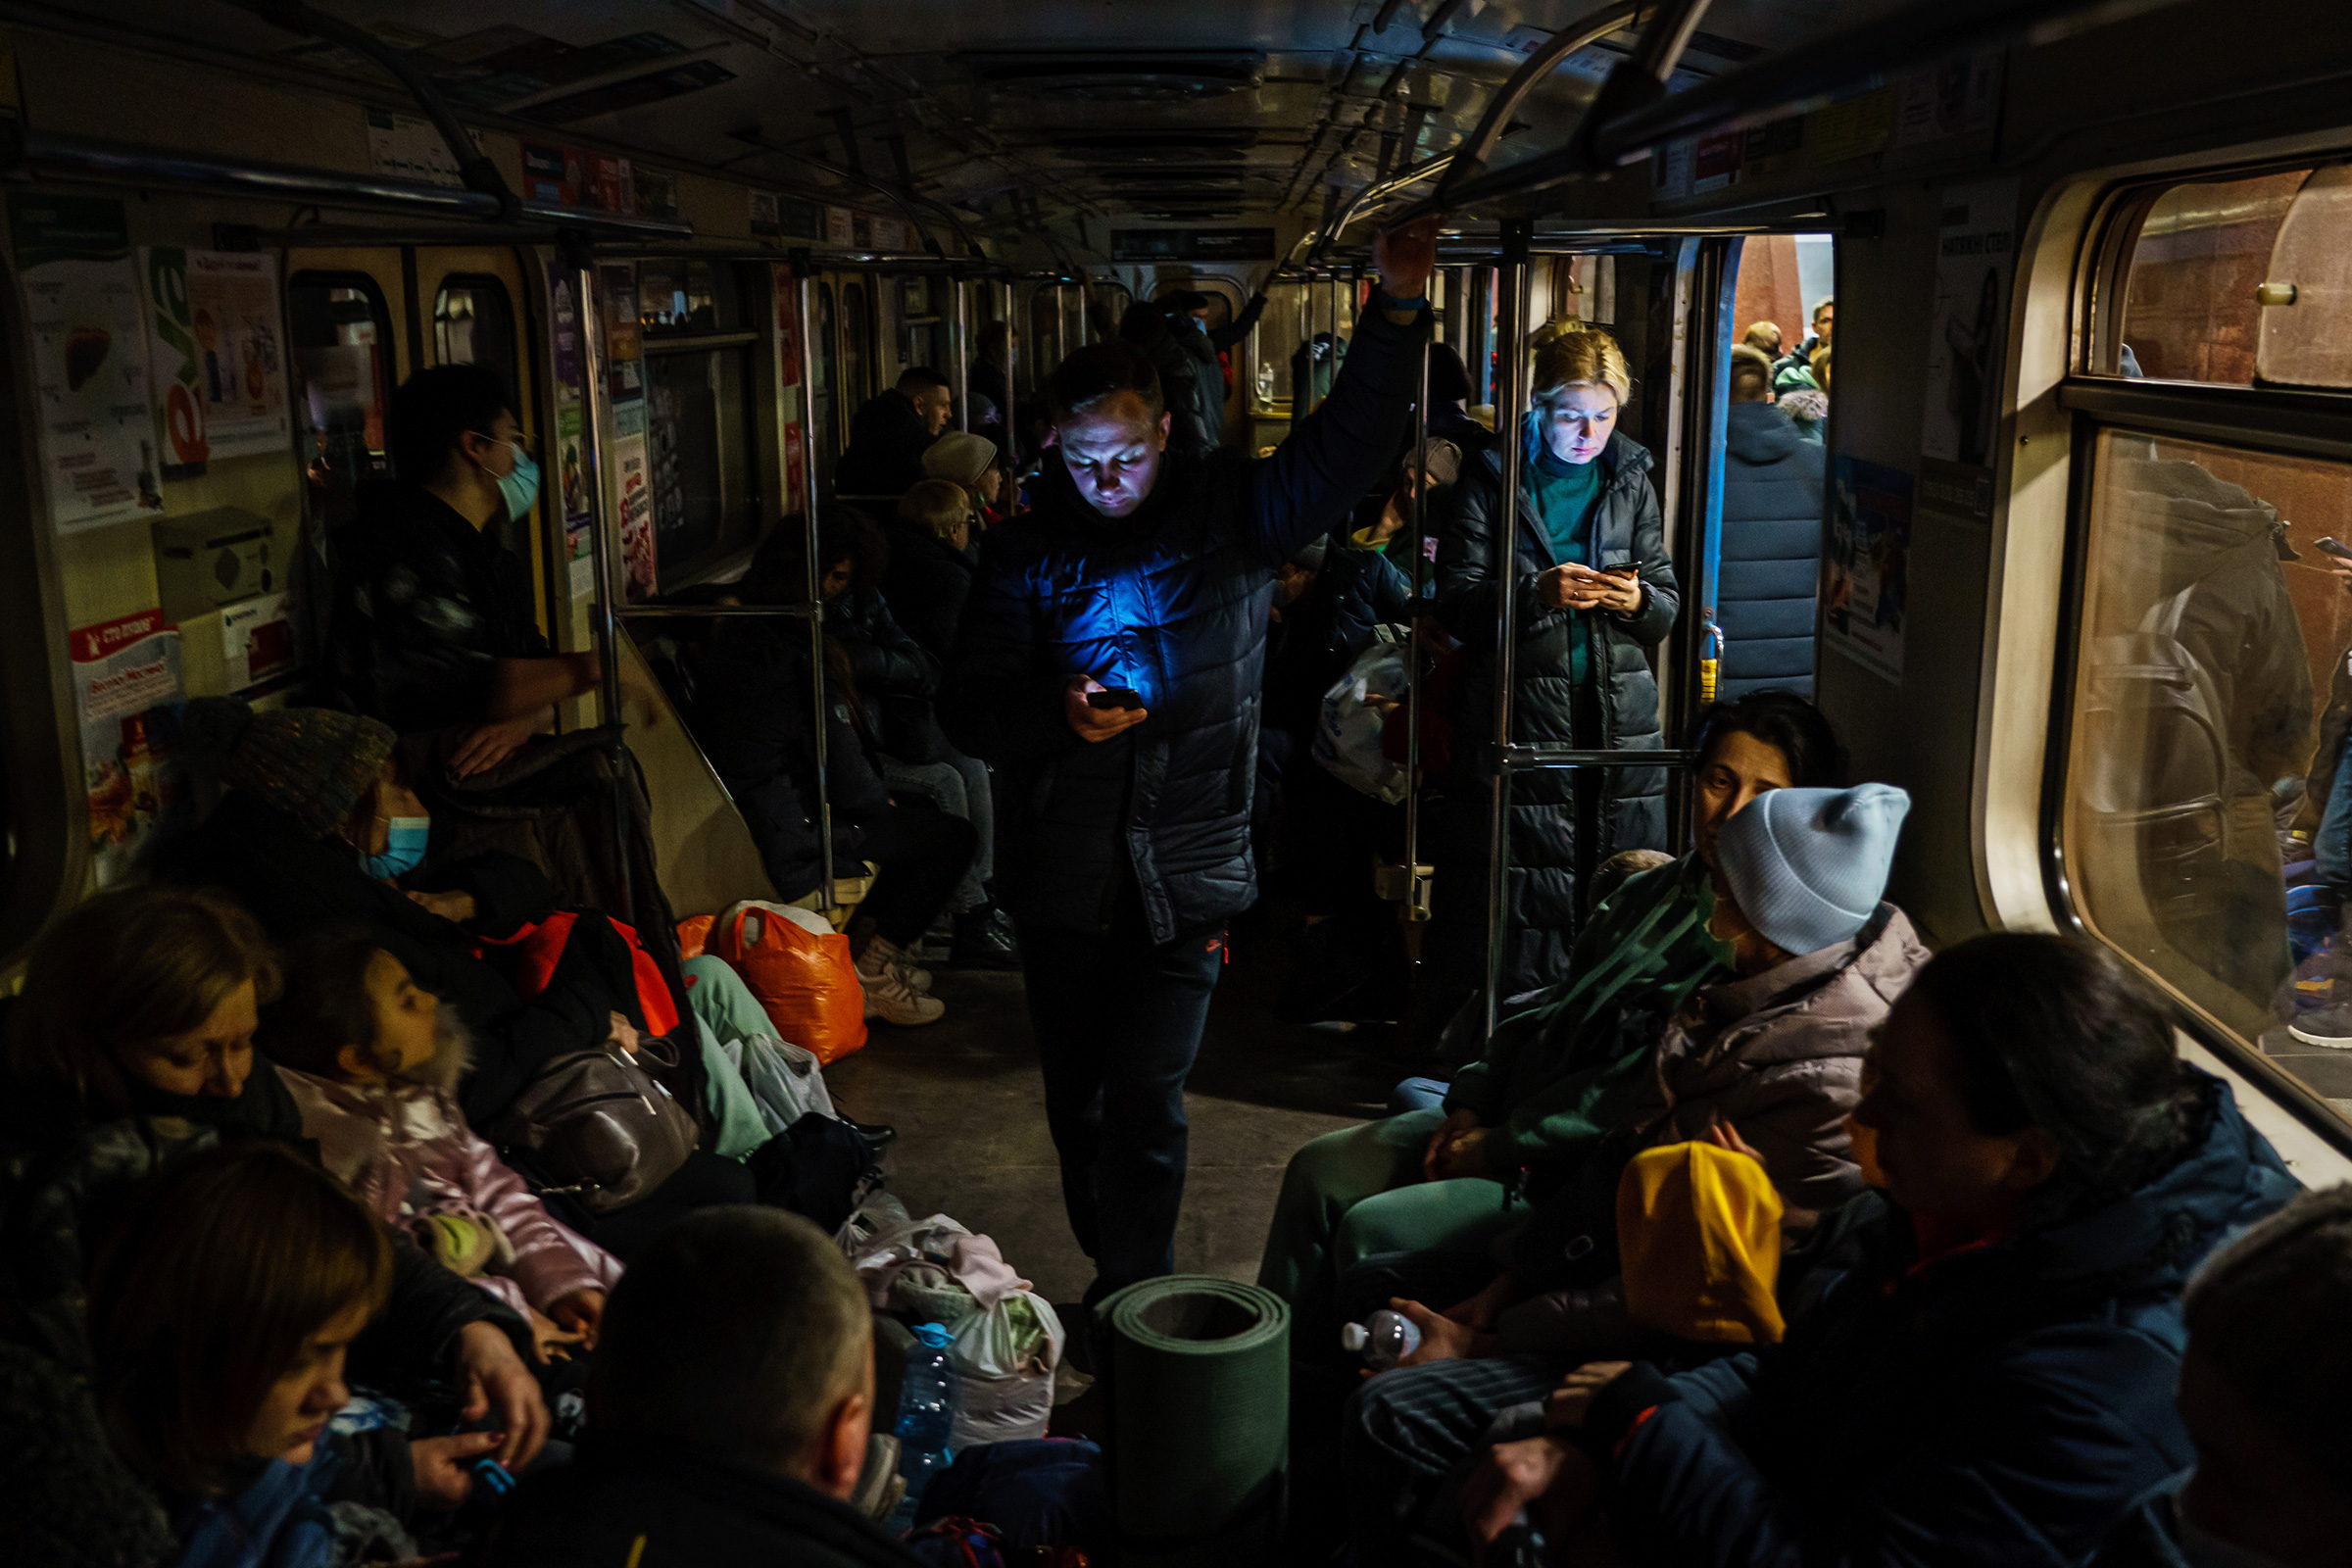 Hundreds of people seek shelter underground inside the dark train cars of a metro station in Kharkiv, as the Russian attack on Ukraine continues on Feb. 24. (Marcus Yam—Los Angeles Times/Getty Images)